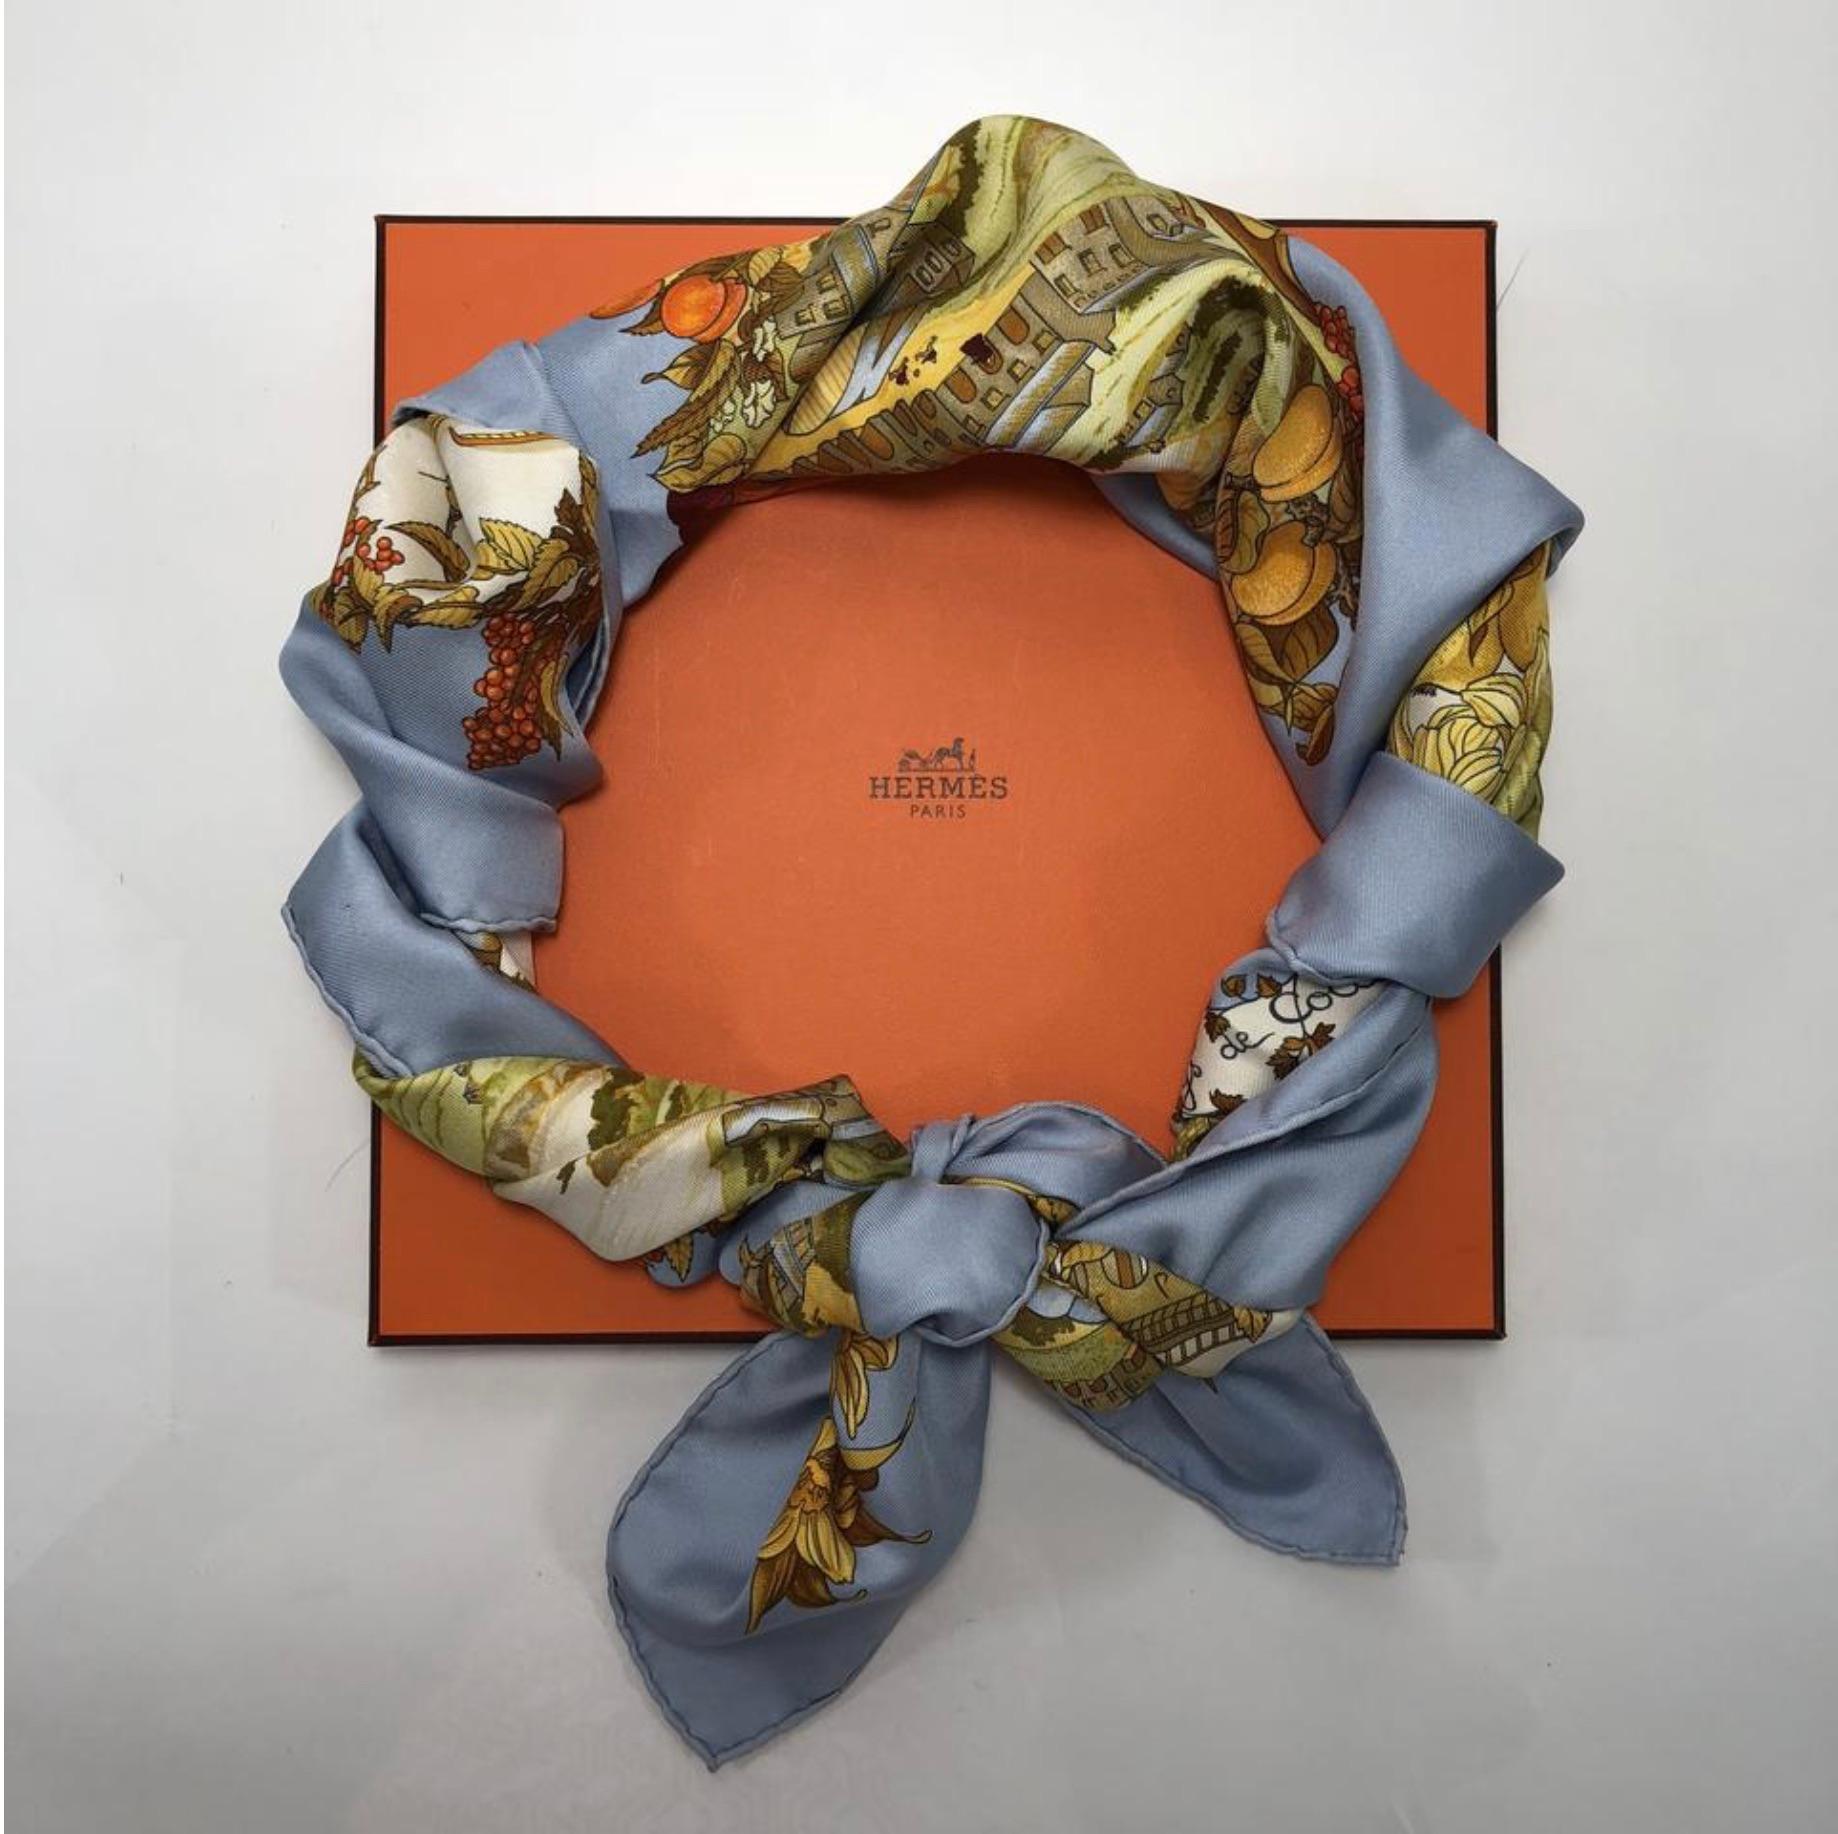 MODEL - Hermes Scarf Au Pays De Cocagne Silk in Light Blue

CONDITION - Very Good. A couple of very light spots.

SKU - 2770

DATE/SERIAL CODE - NA

ORIGIN - France

PRODUCTION - NA

DIMENSIONS - L35 x H35 x D.05

STRAP/HANDLE DROP - NA

MATERIAL -